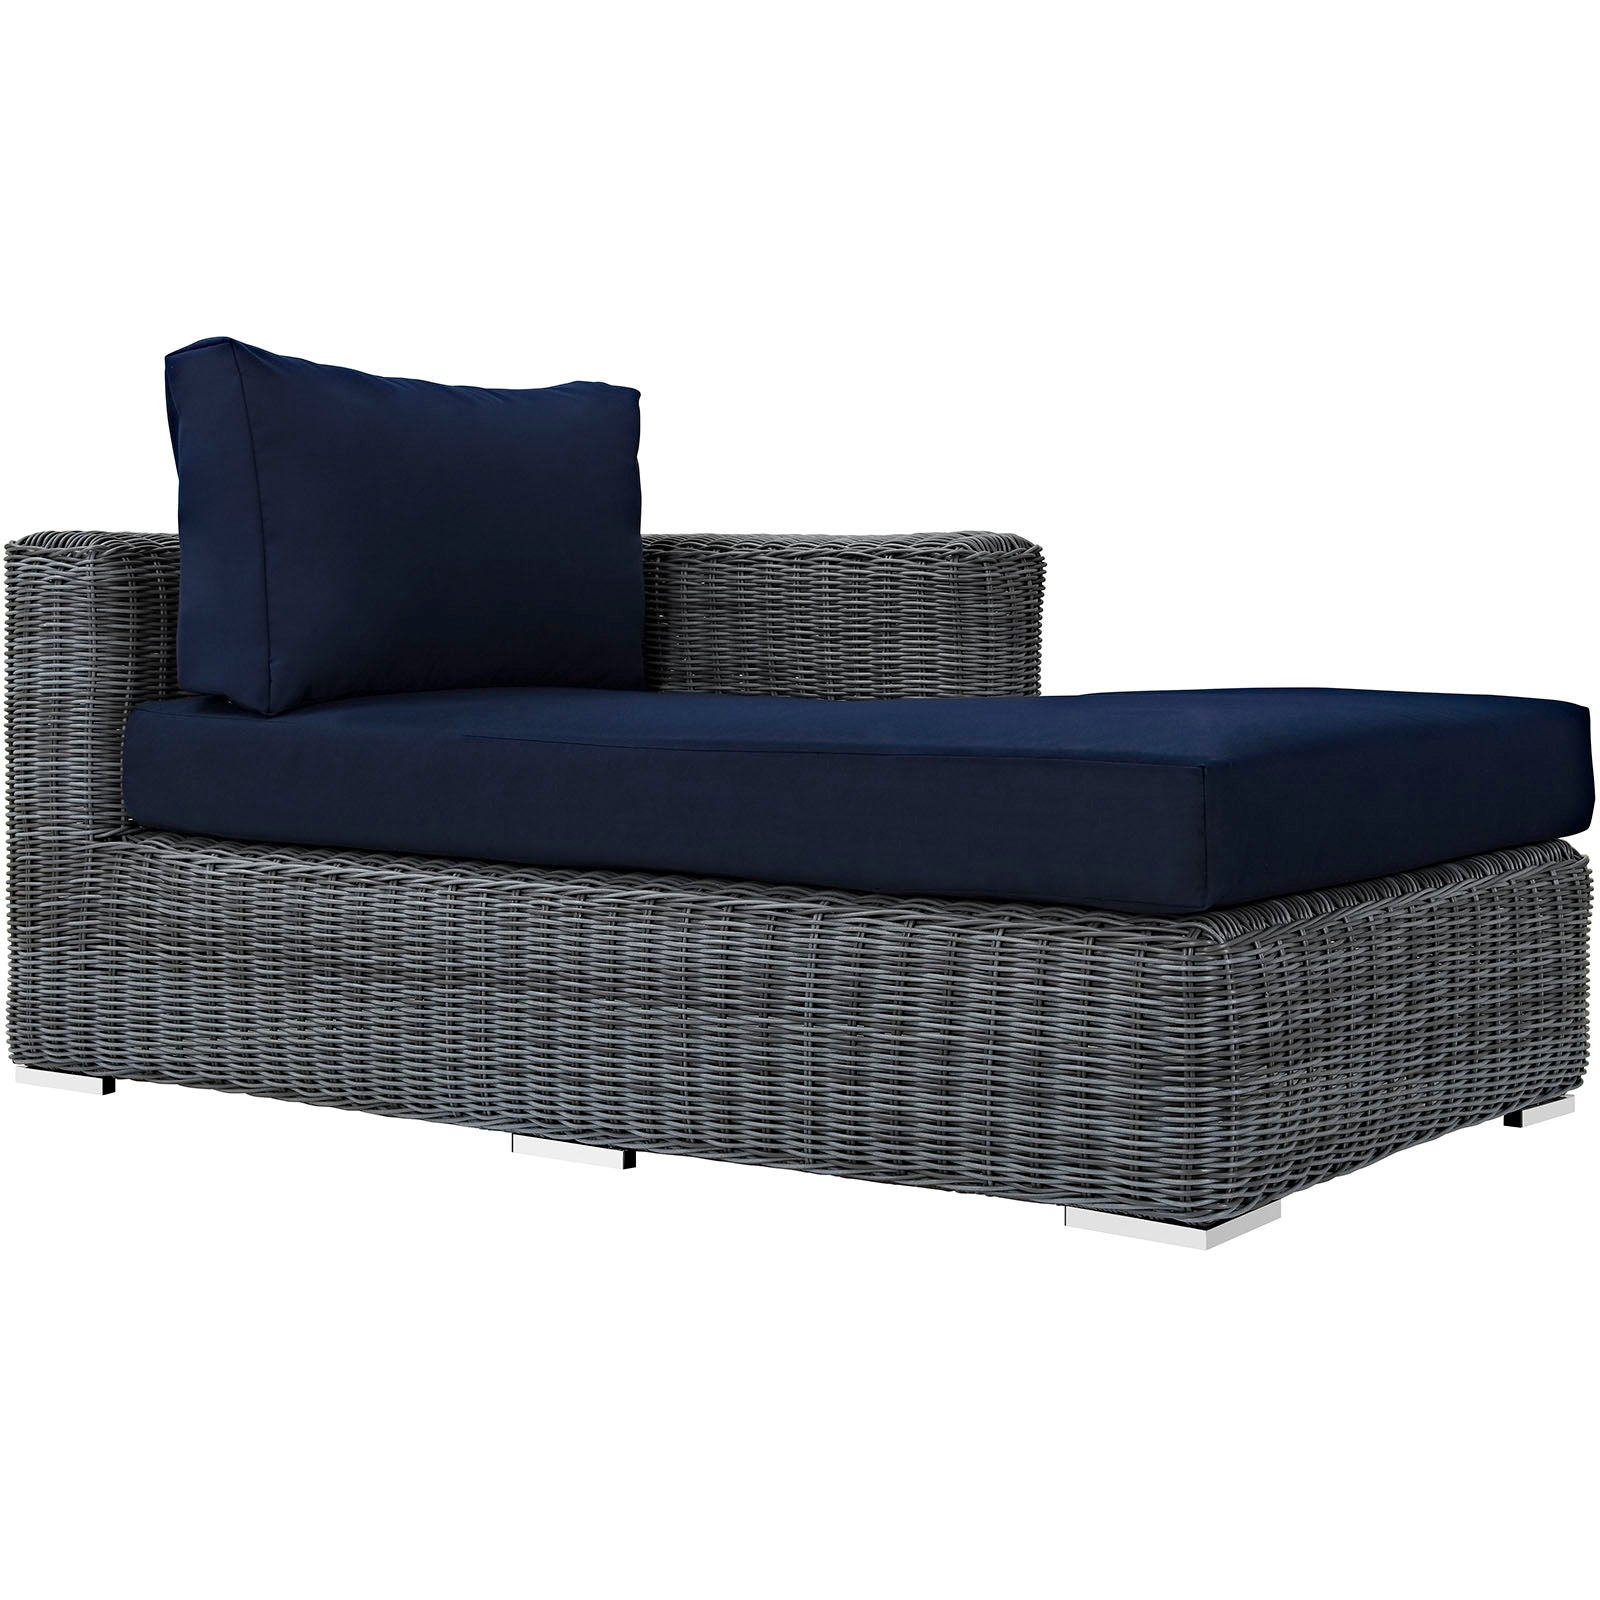 Modway Patio Daybeds - Summon Outdoor Patio Sunbrella Right Arm Chaise Canvas Navy